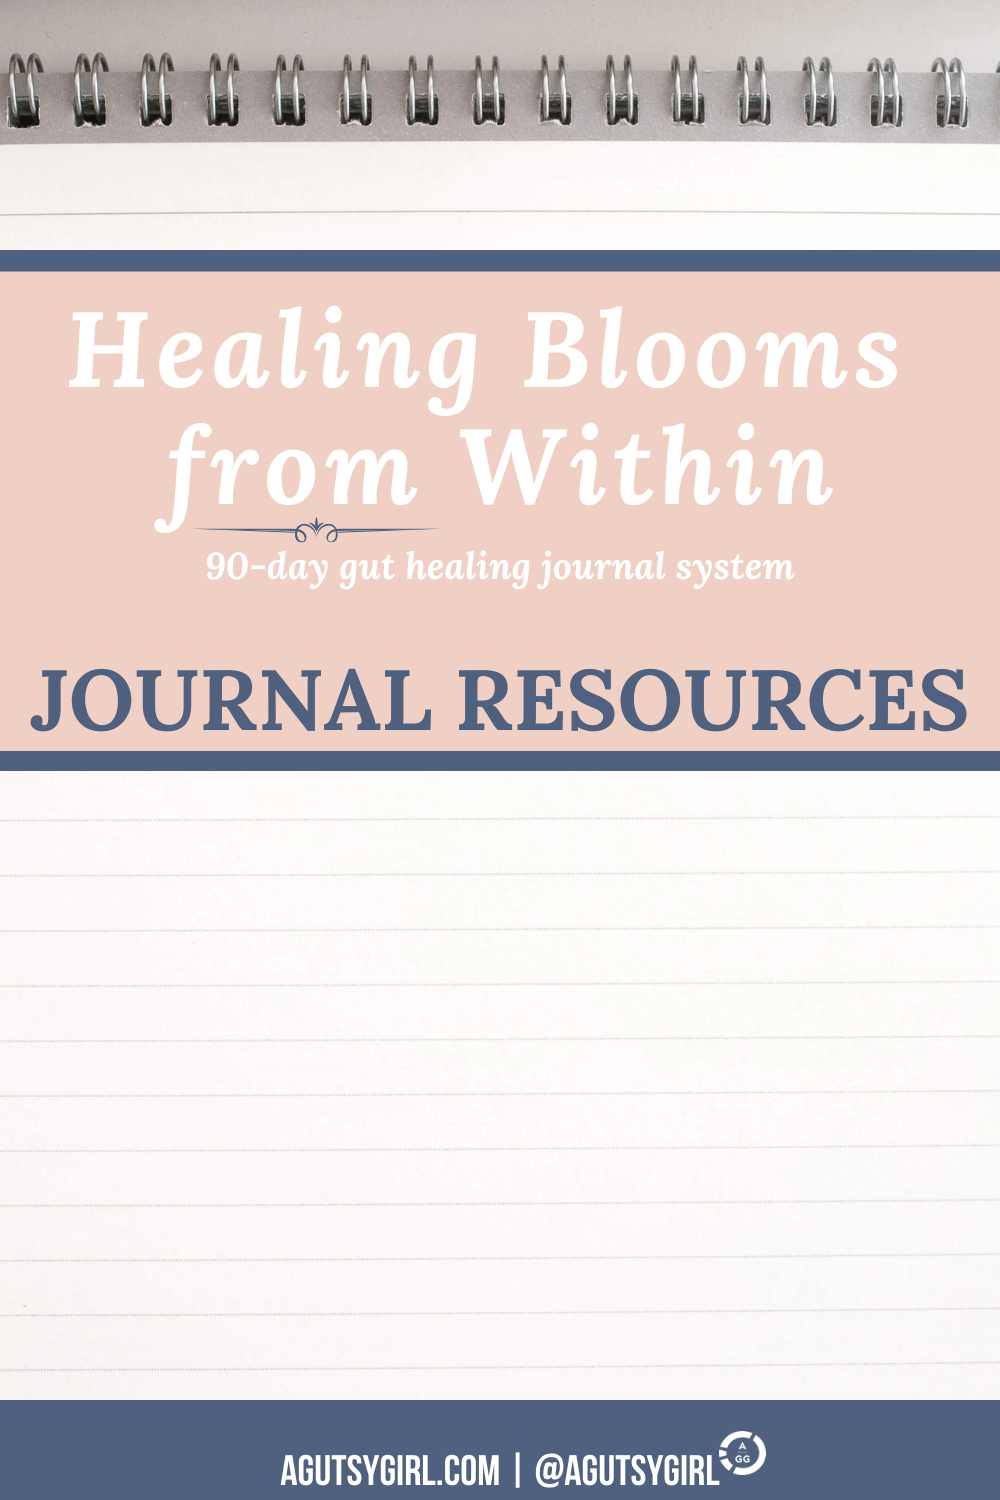 Journal Resources for 90-day gut healing journal Healing Blooms from Within agutsygirl.com #guthealth #journal #bujo